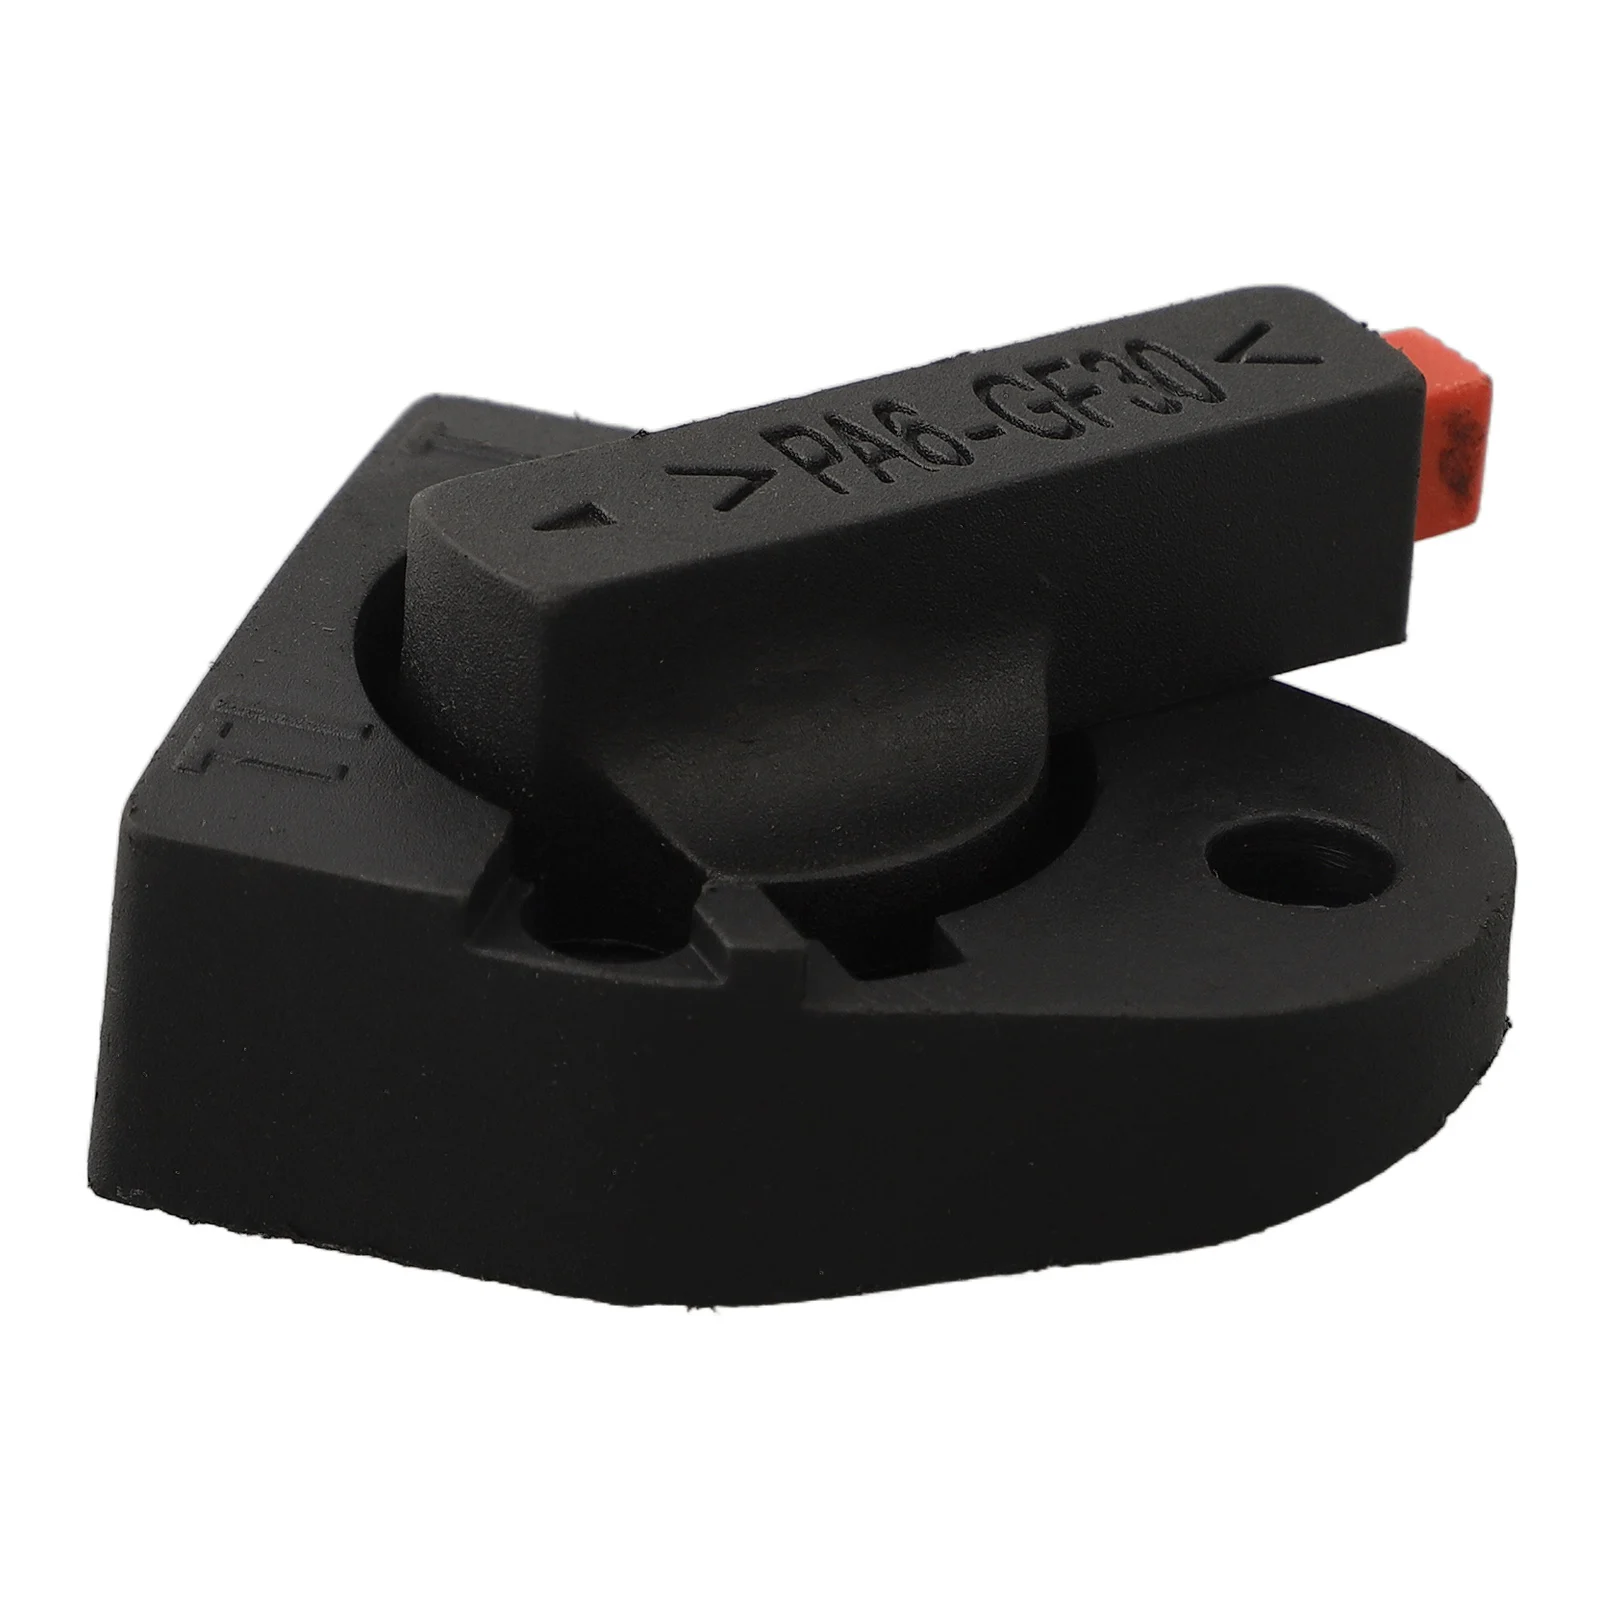 

Take Your Gear Shifting Experience to the Next Level with this Hammer Converter Shift Switch Compatible with 26 Hammer Converter